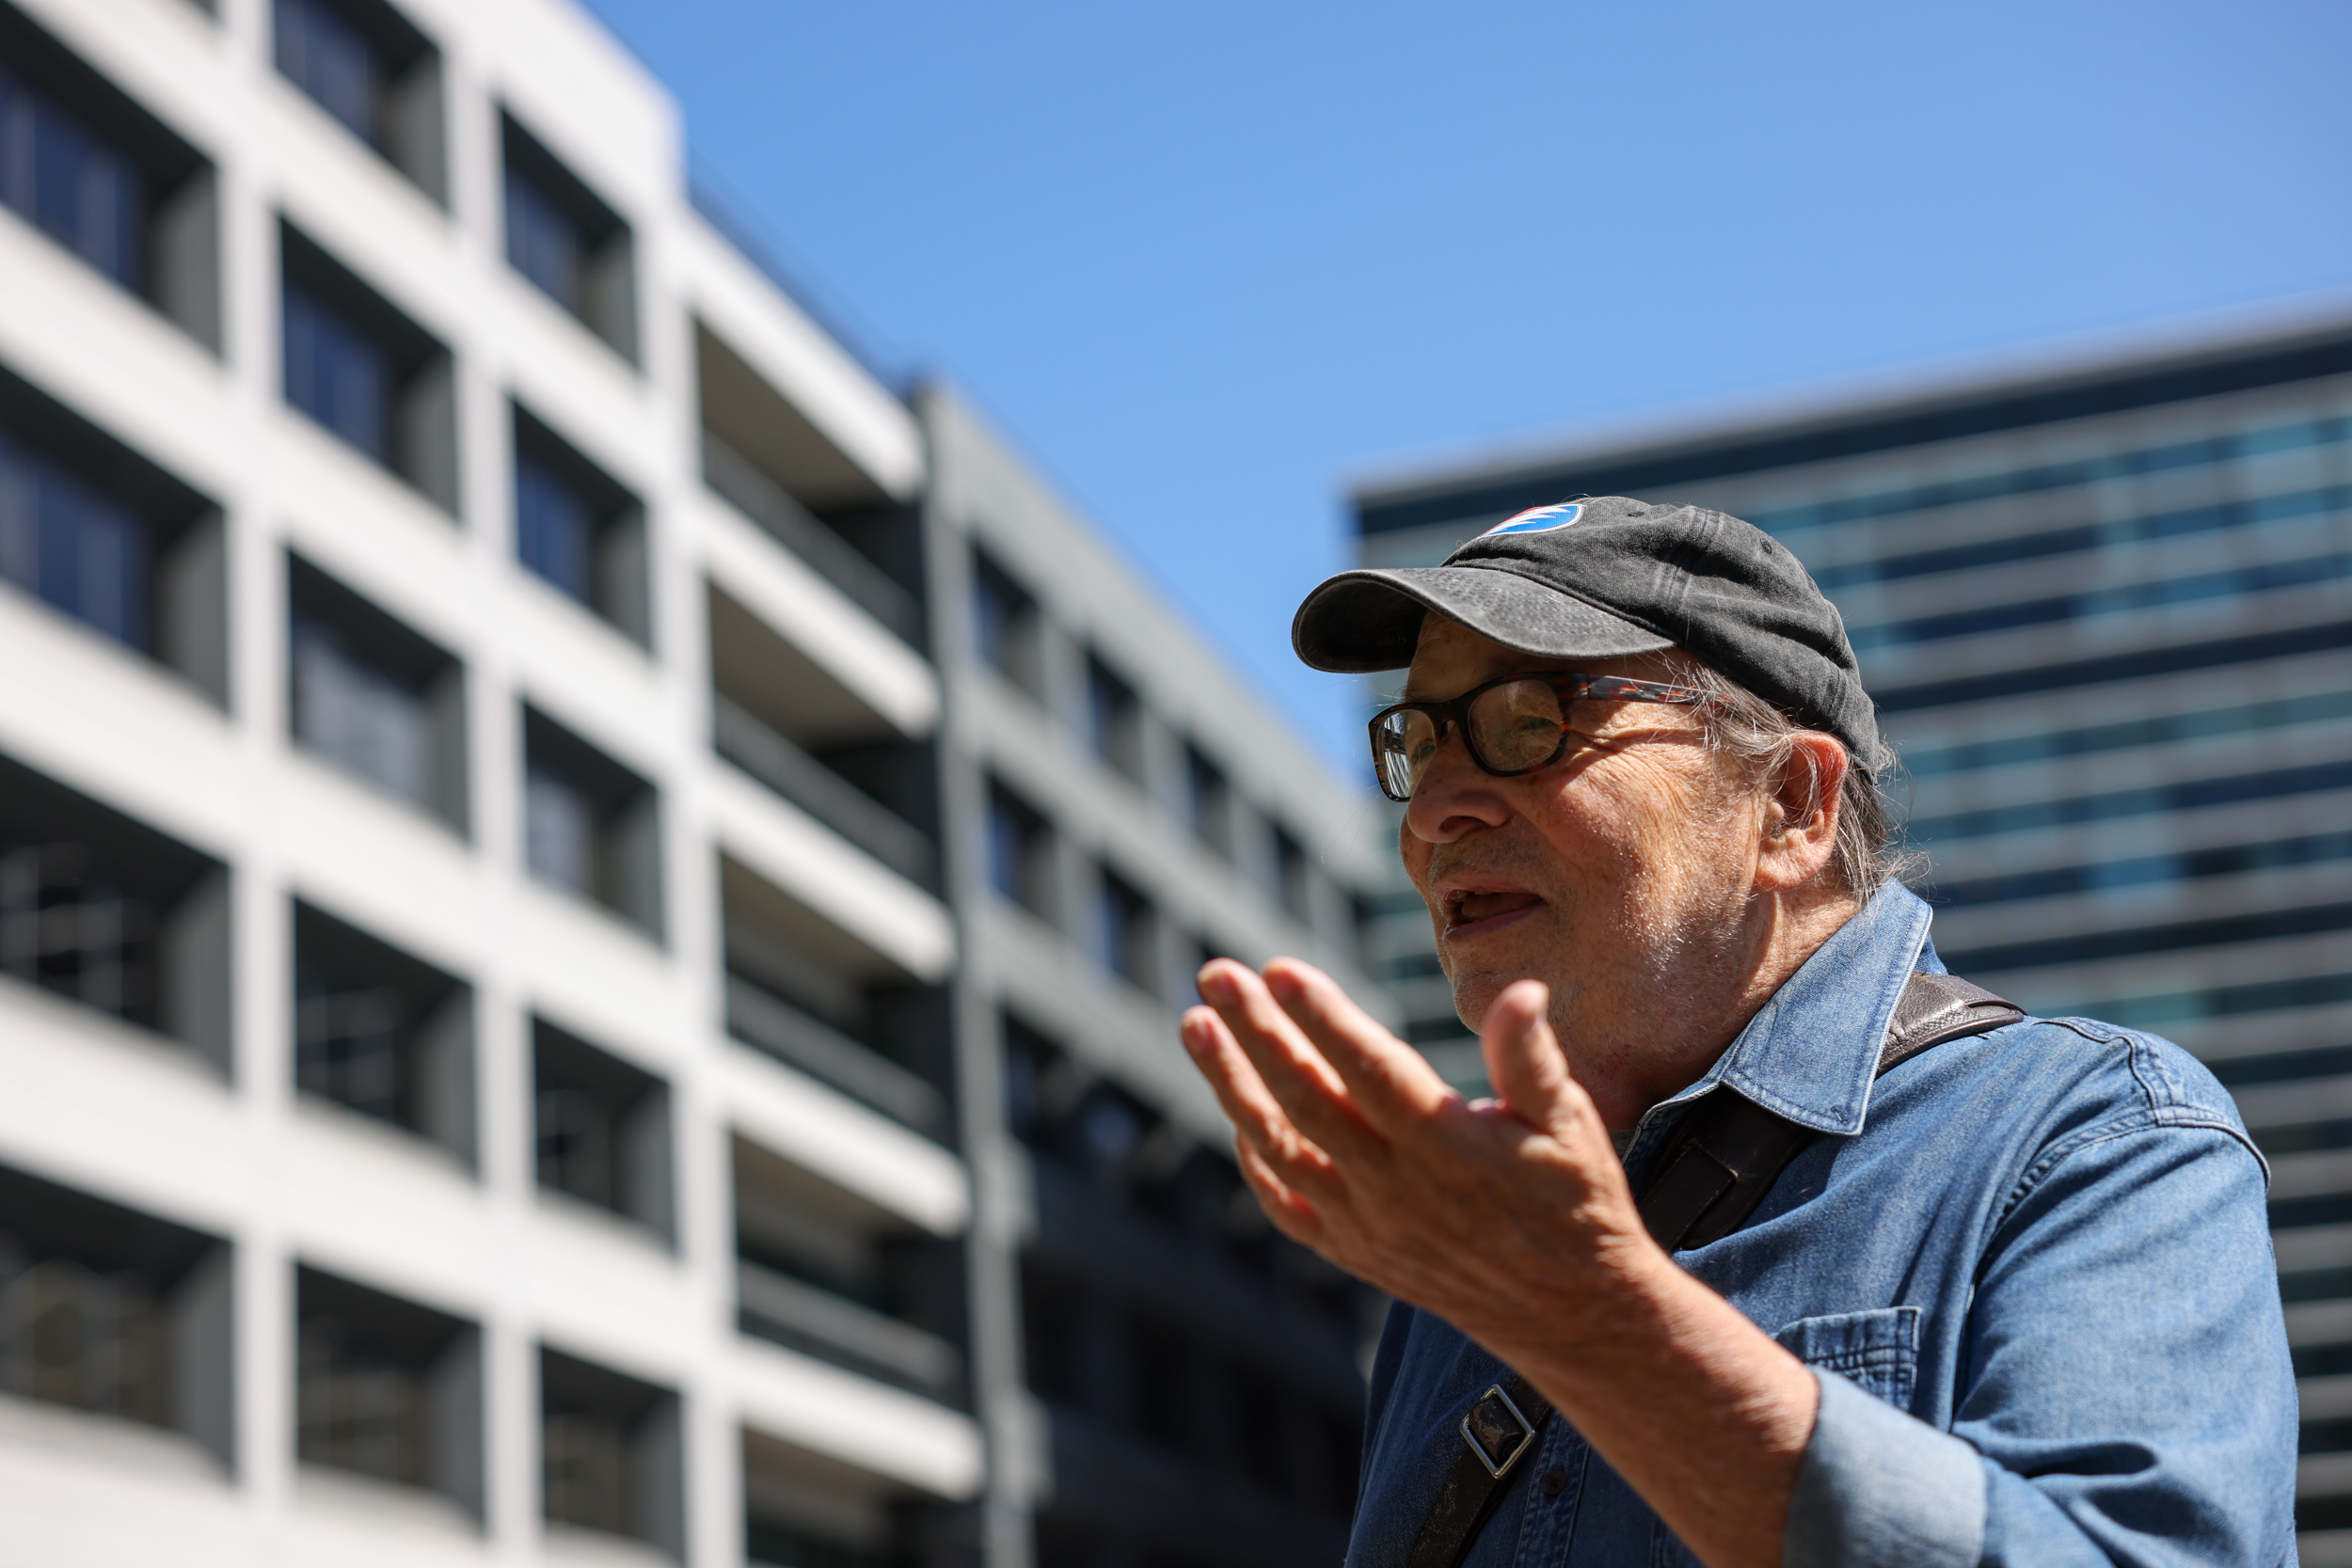 An elderly man in a cap, gesturing with his hands, with blurry buildings in the background.